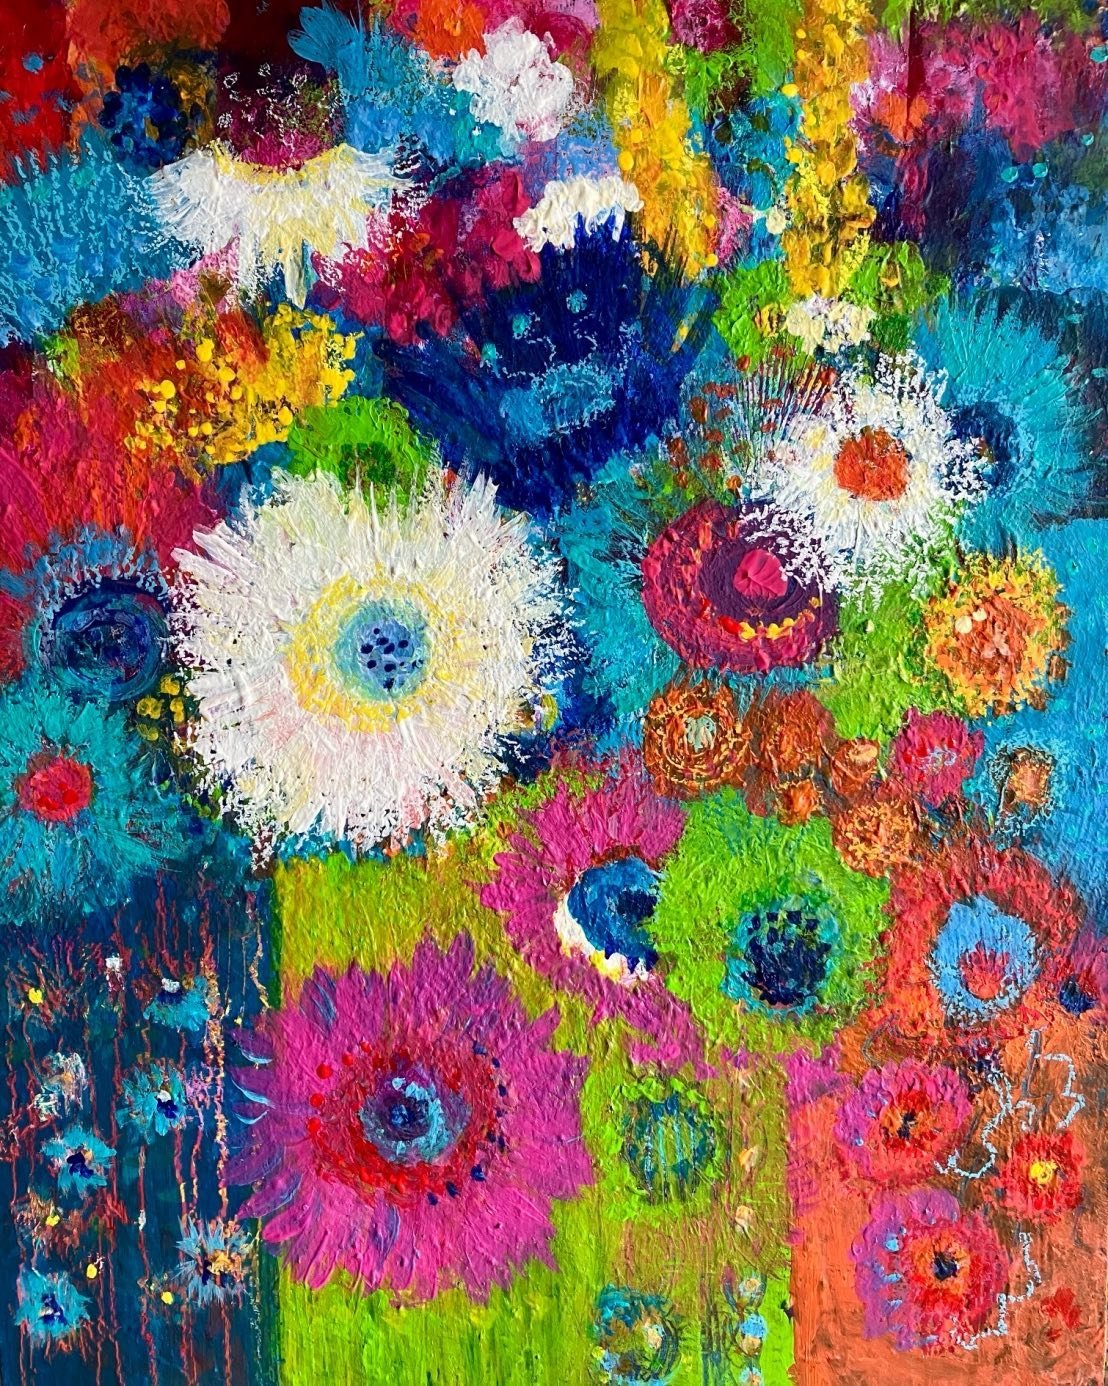 &ldquo;Bringing the party&rdquo; a reworked earlier piece( I love that about acrylics- layers and layers of ideas!) #abstractflowers#colourfulacstracts#colourfullife